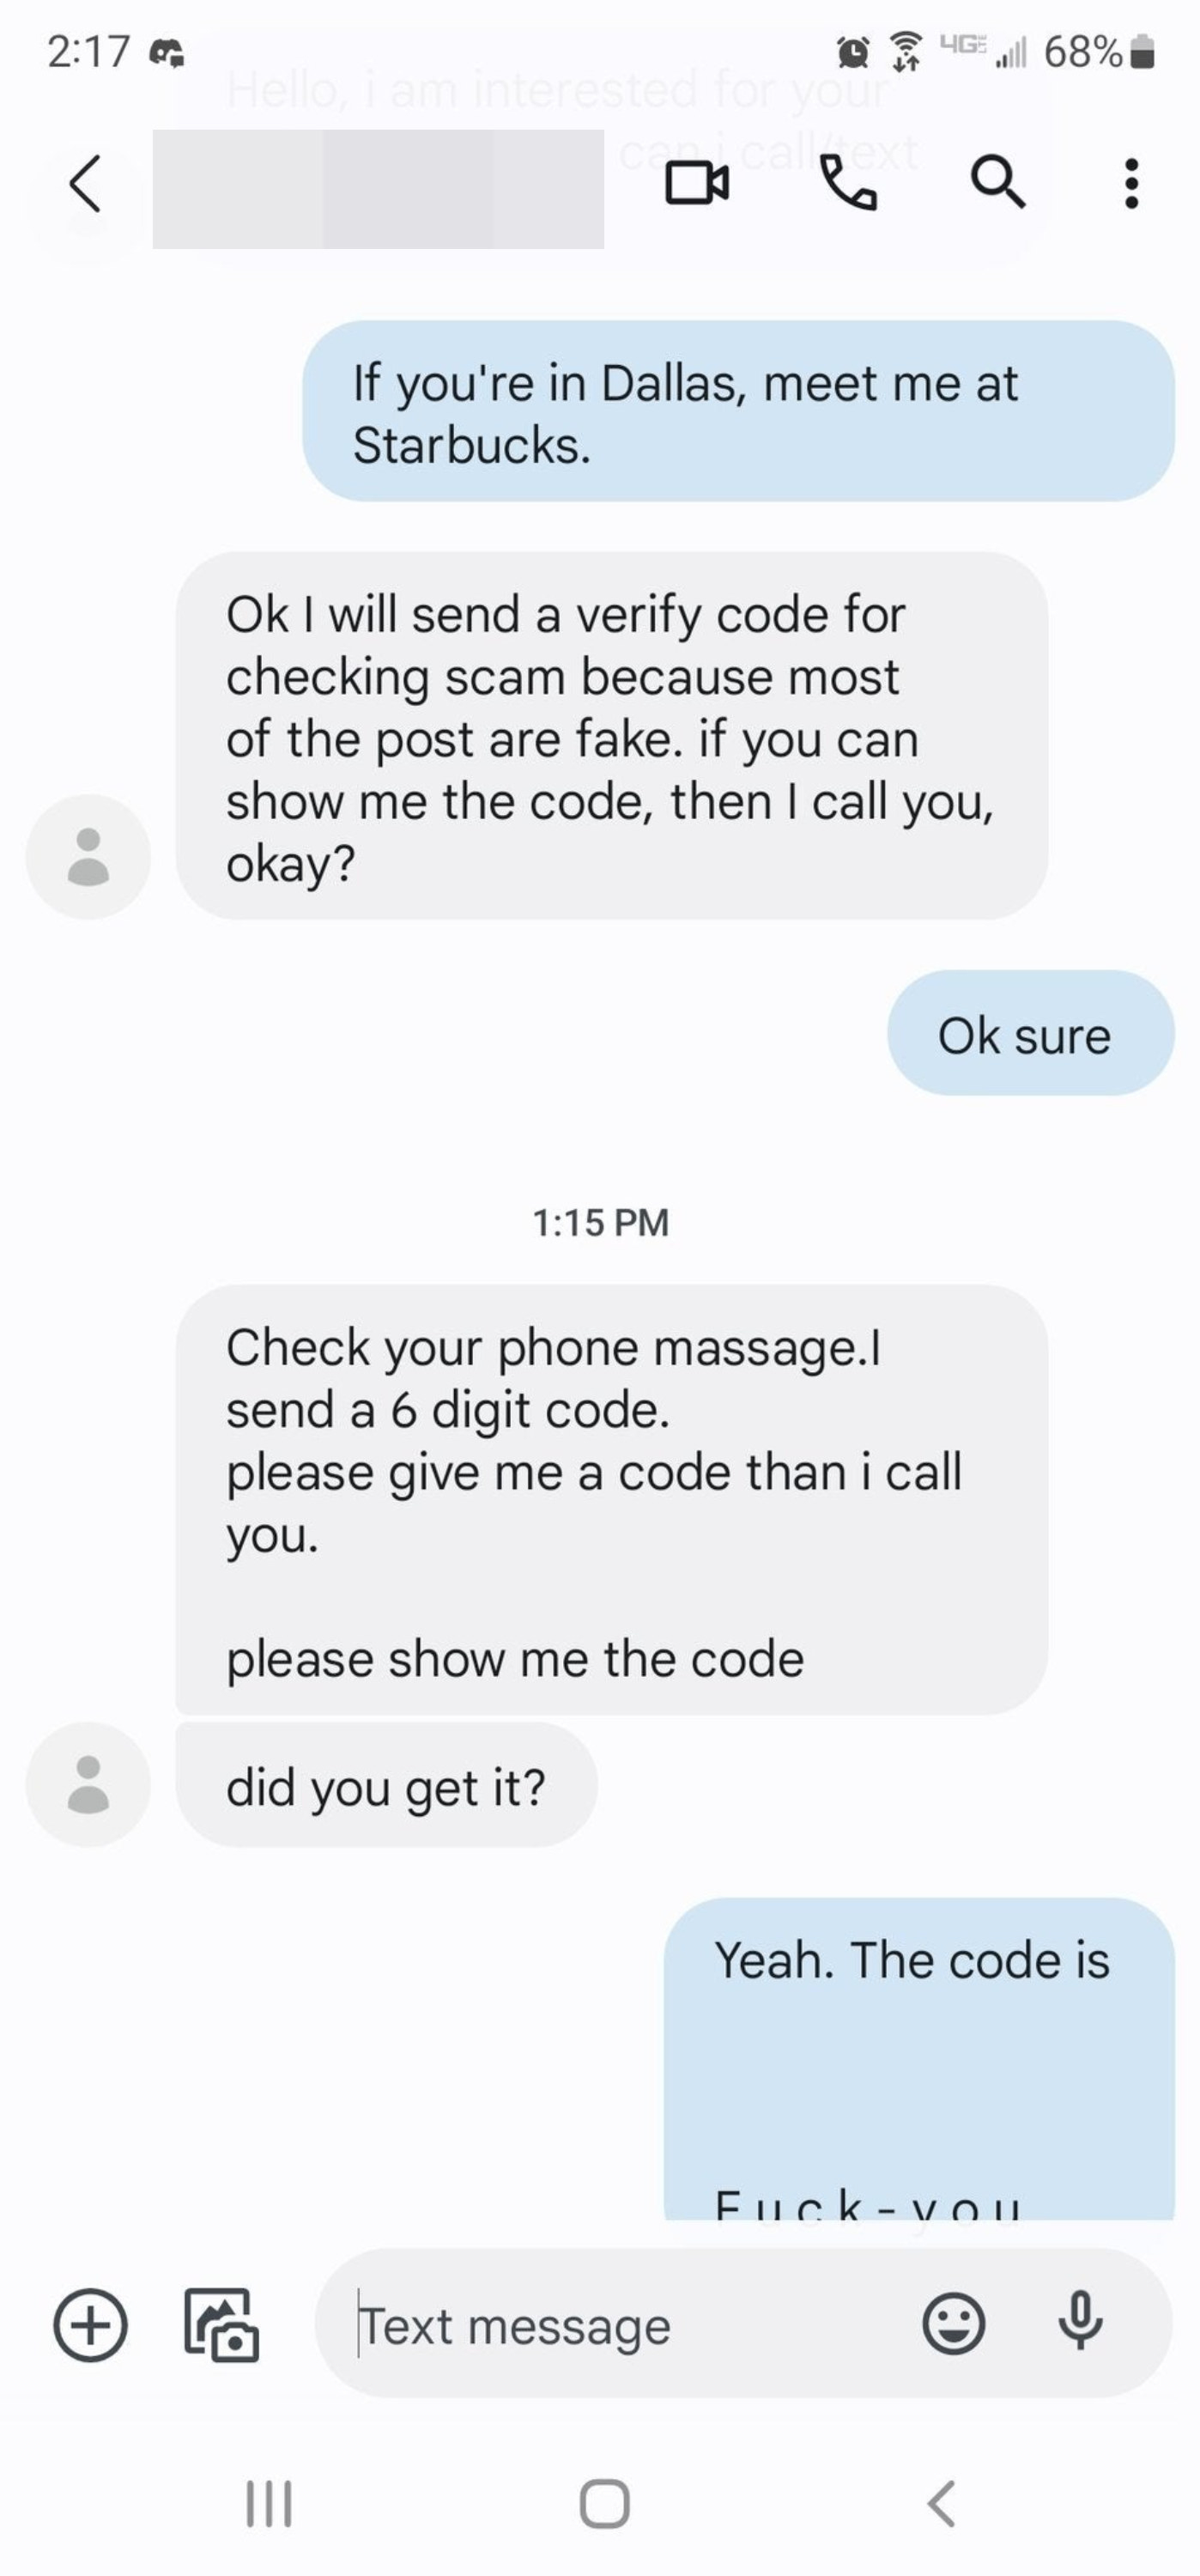 Scammer who asks for a 6-digit code and gets sent a cussword